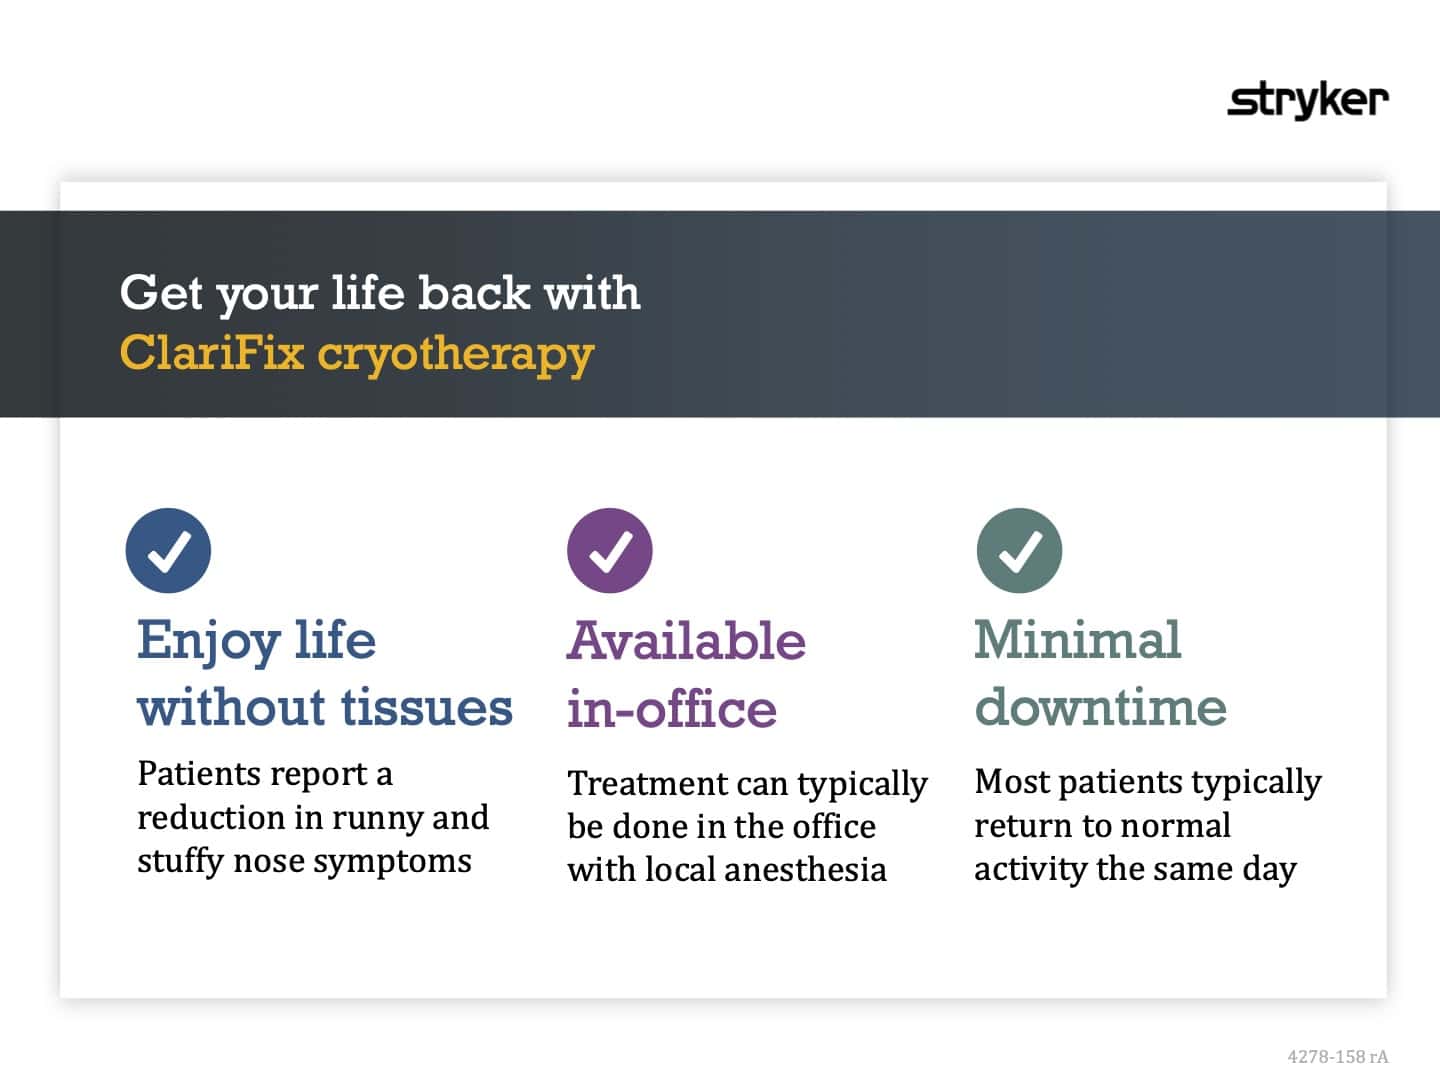 Getting your life back with ClariFix treament.